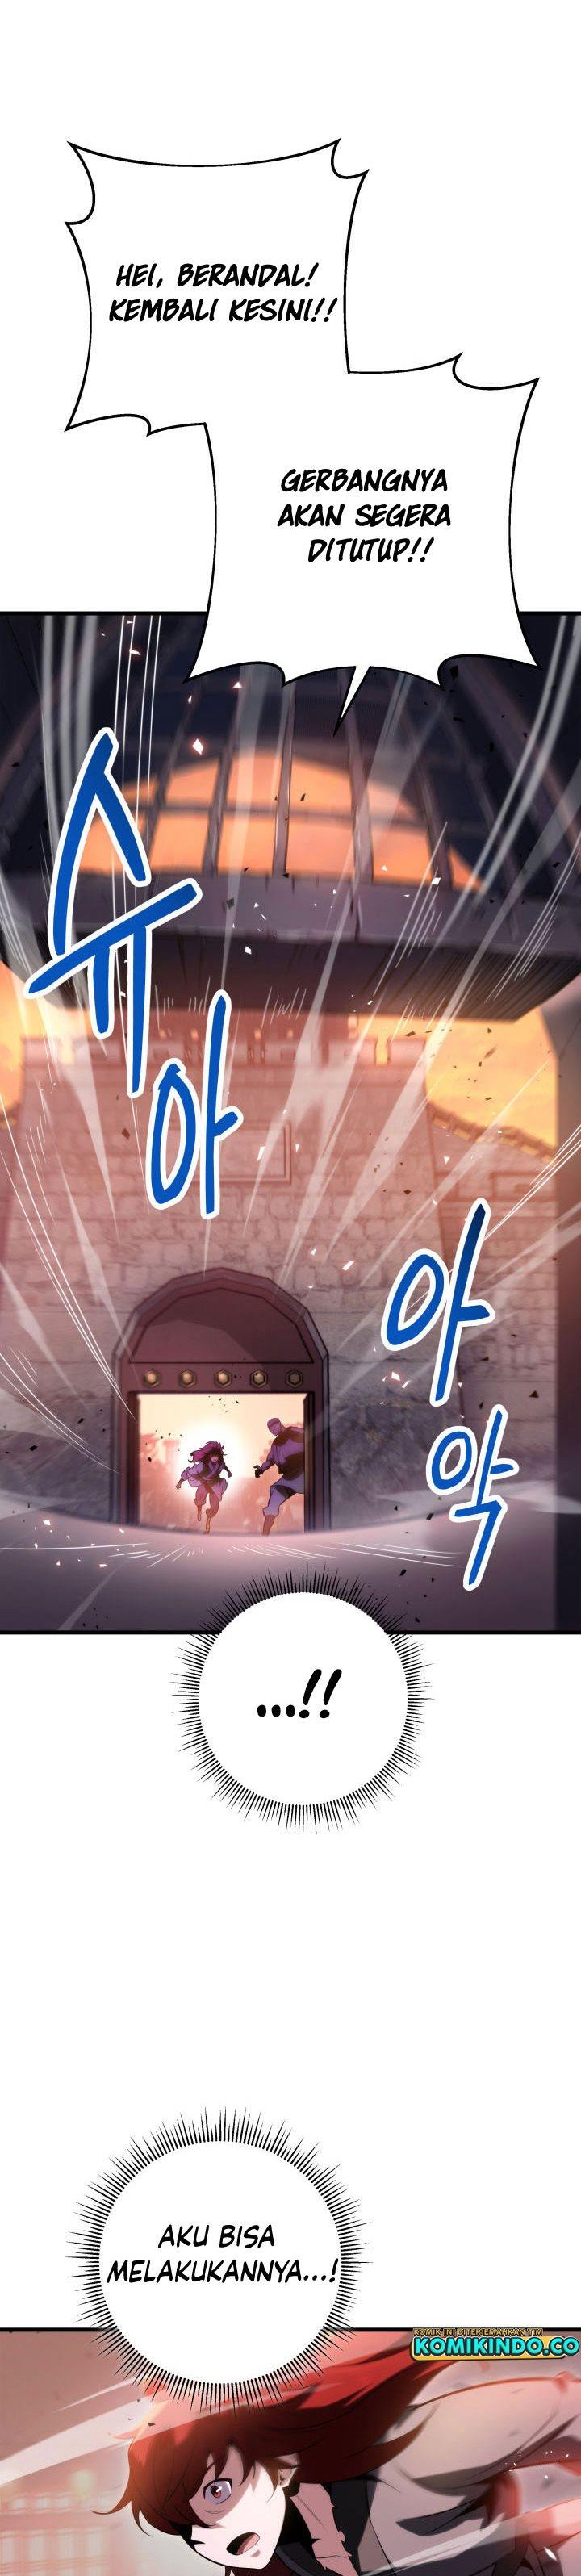 Heavenly Inquisition Sword Chapter 6